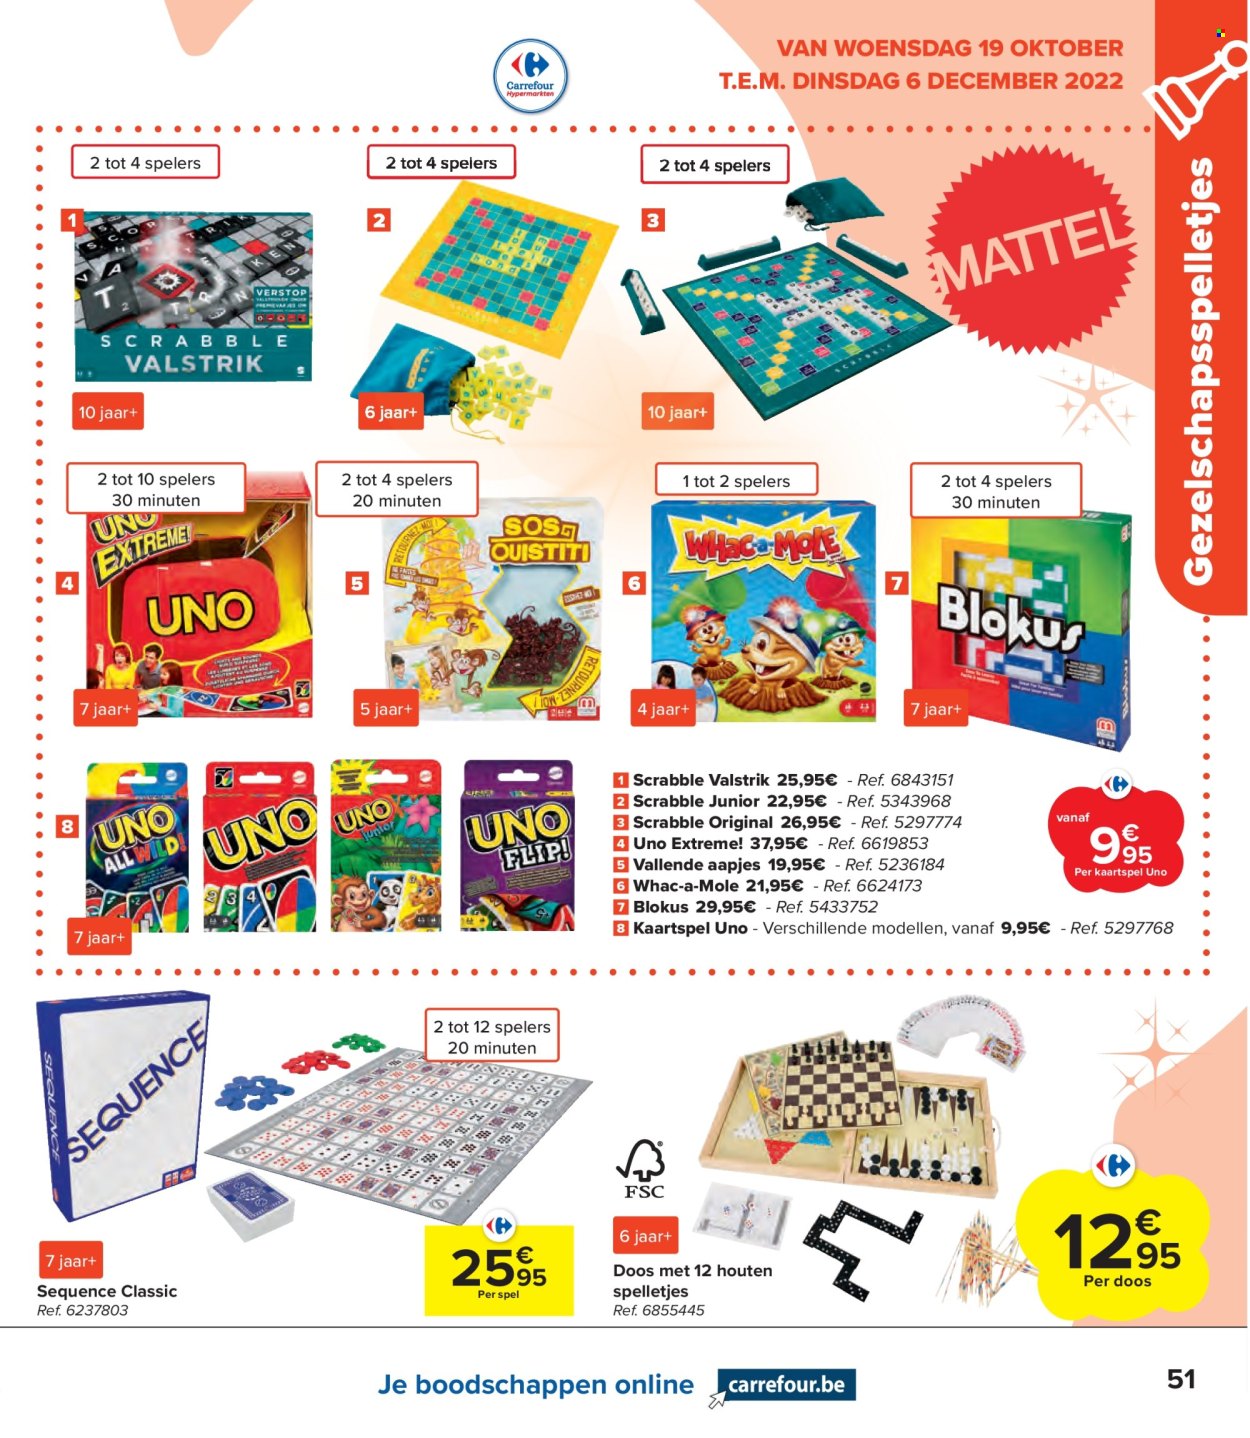 Catalogue Carrefour hypermarkt - 19.10.2022 - 6.12.2022. Page 51.